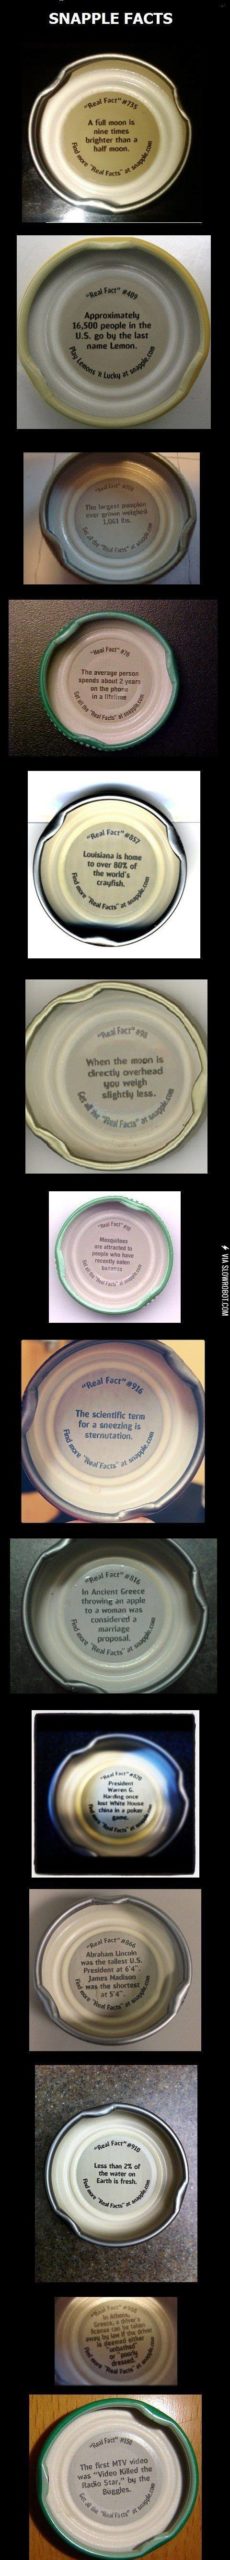 Snapple+facts.